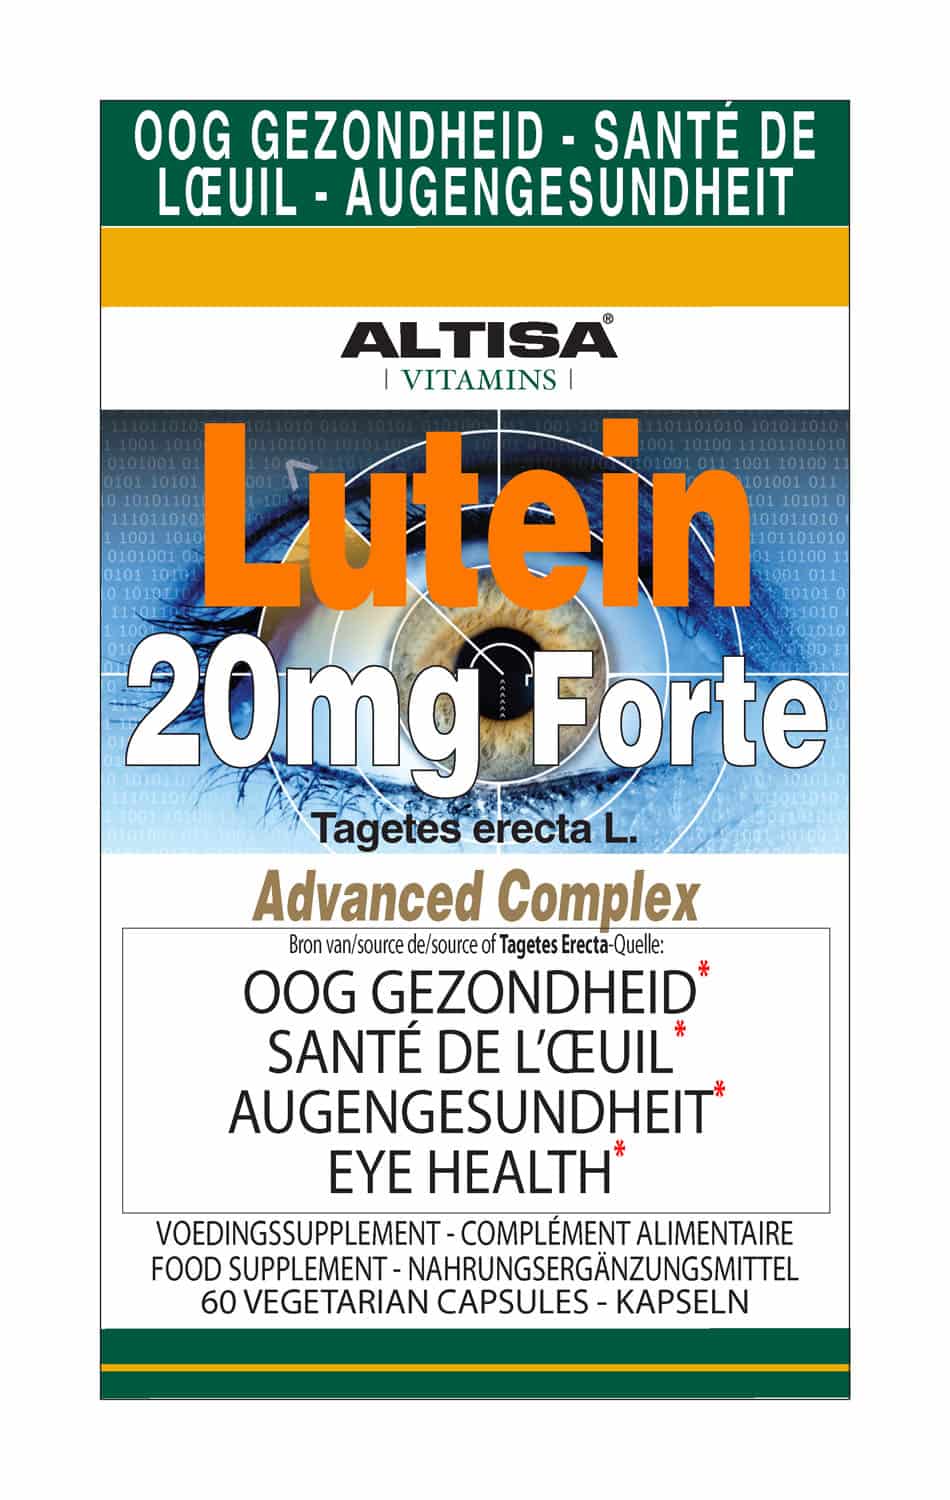 Altisa Lutein 20 mg Forte